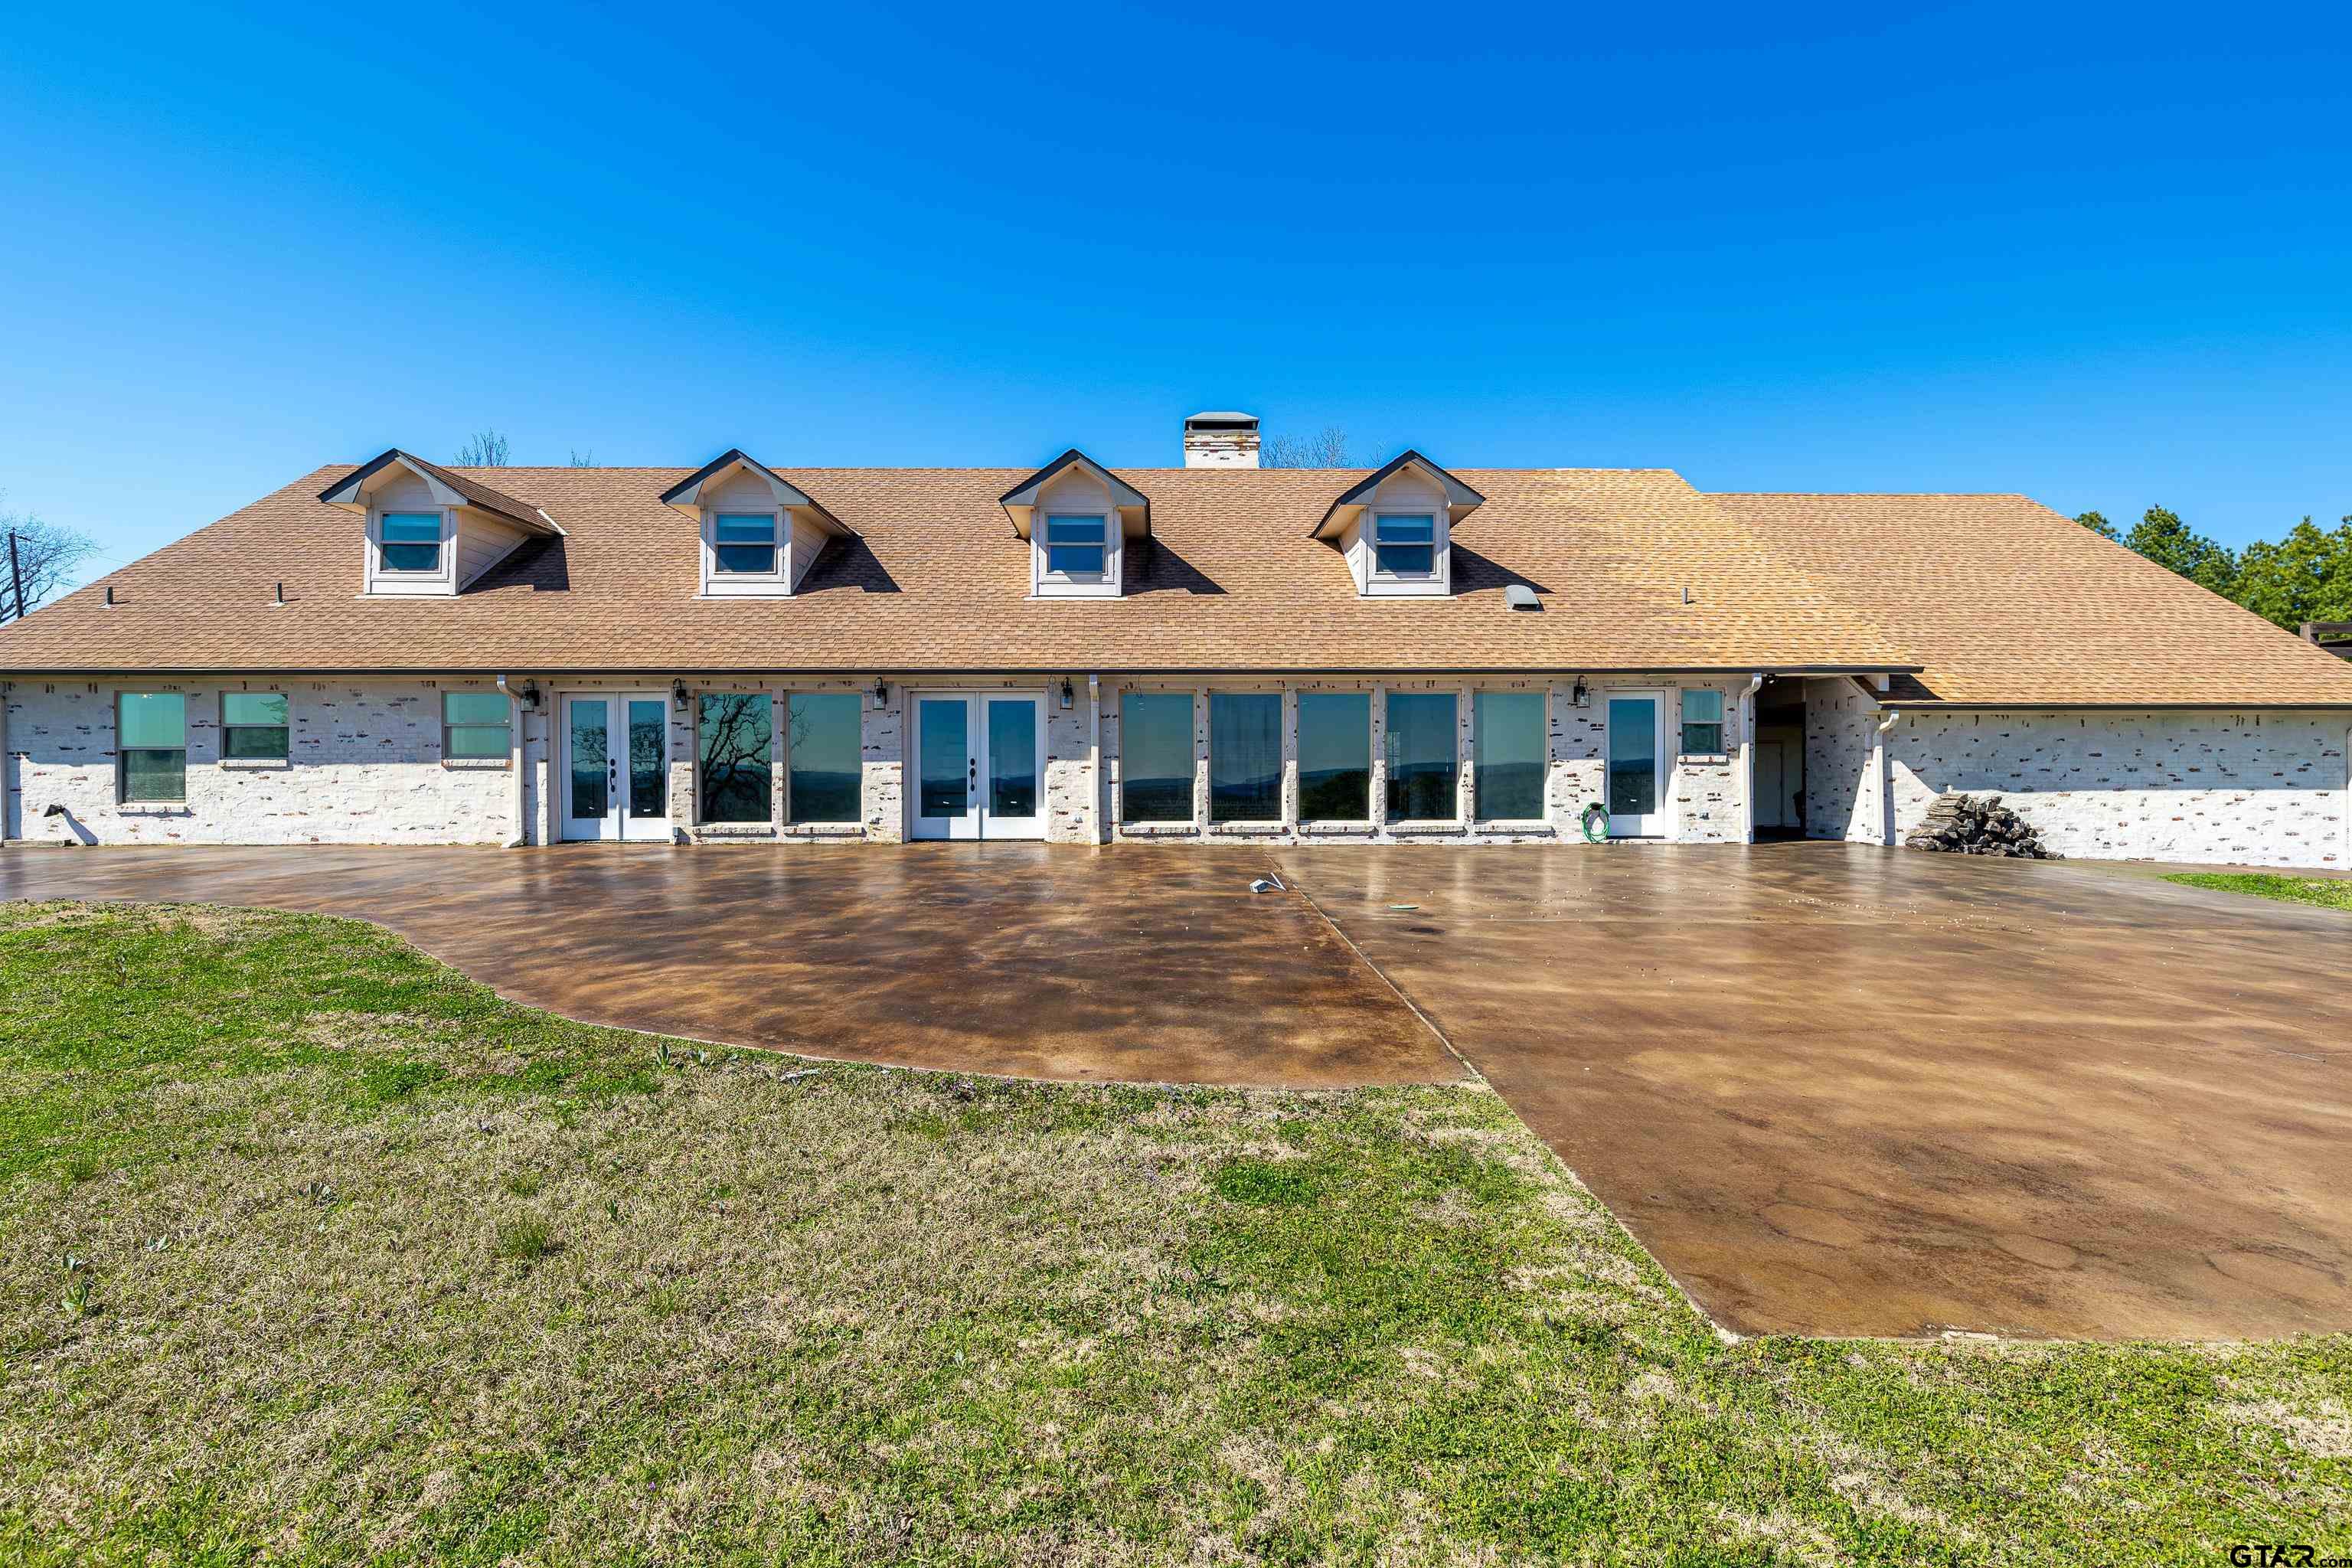 245 County Road 3914, Bullard, Texas, 75757, United States, 7 Bedrooms Bedrooms, ,5 BathroomsBathrooms,Residential,For Sale,245 County Road 3914,1474440